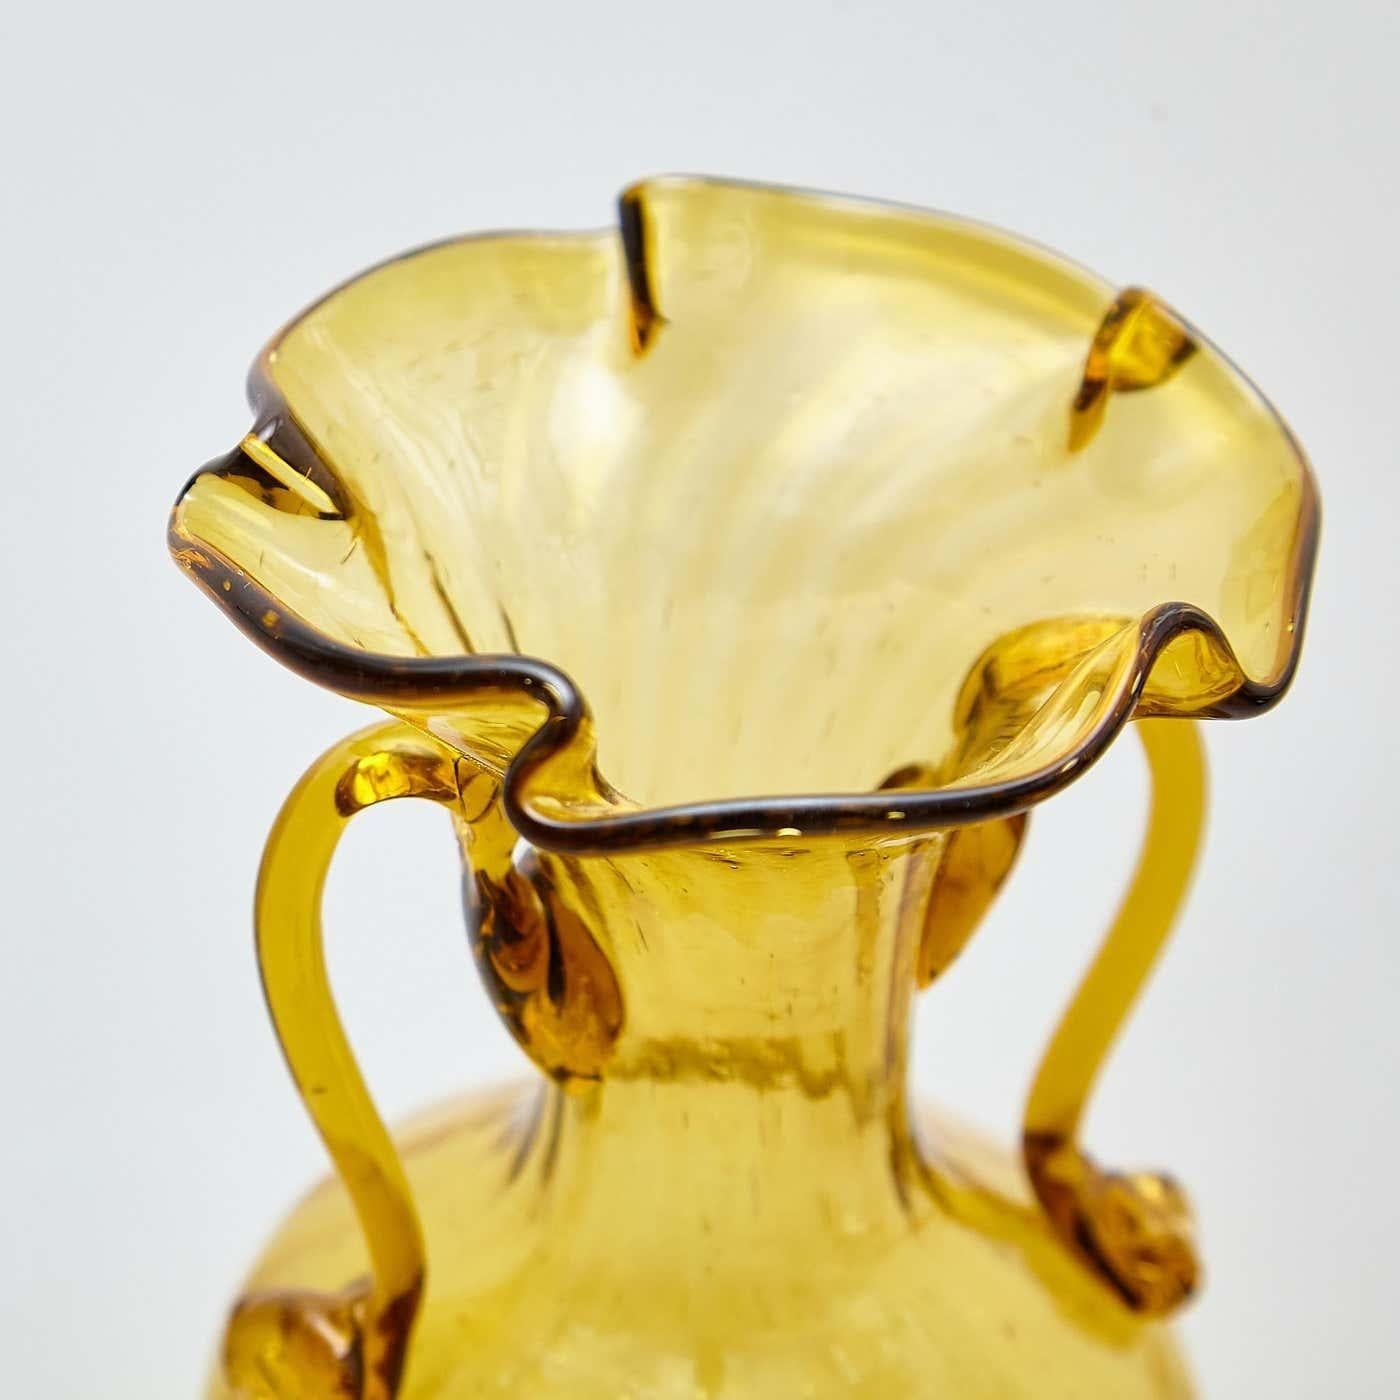 Extraordinary Yellow Blown Glass Vase - Early 20th Century For Sale 3